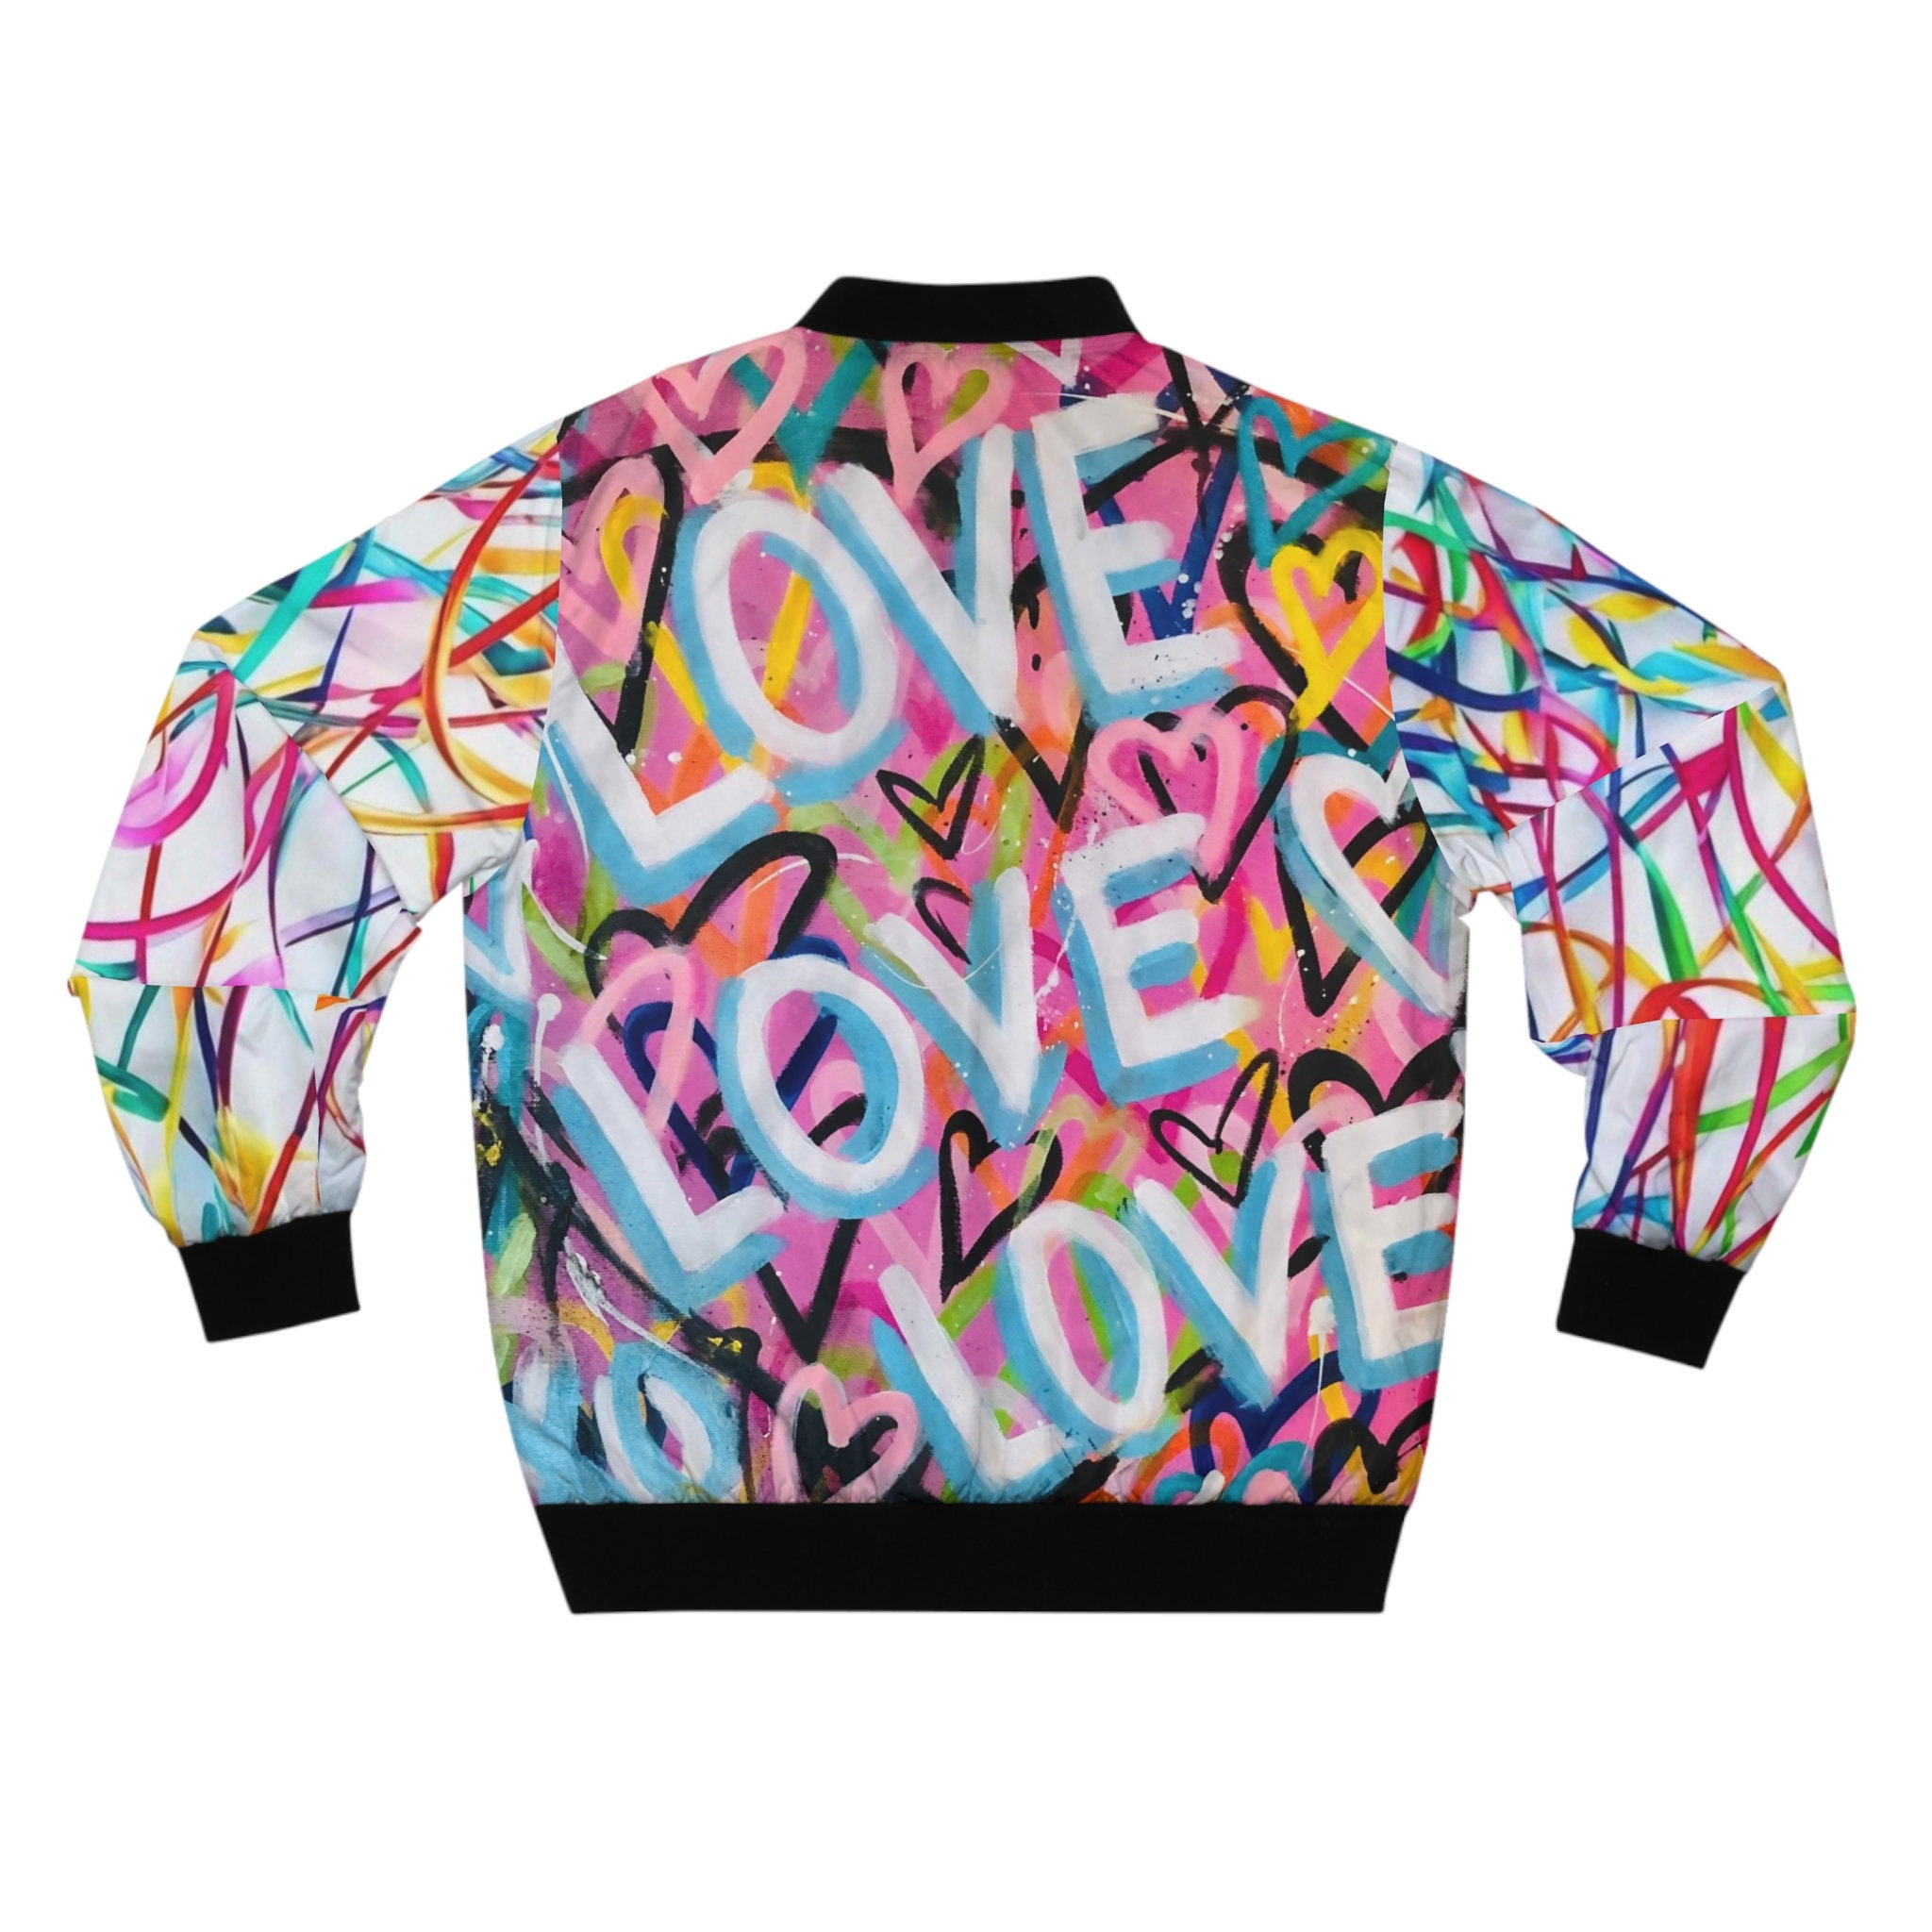 Discover Love Is The Answer Graffiti Men's Bomber Jacket